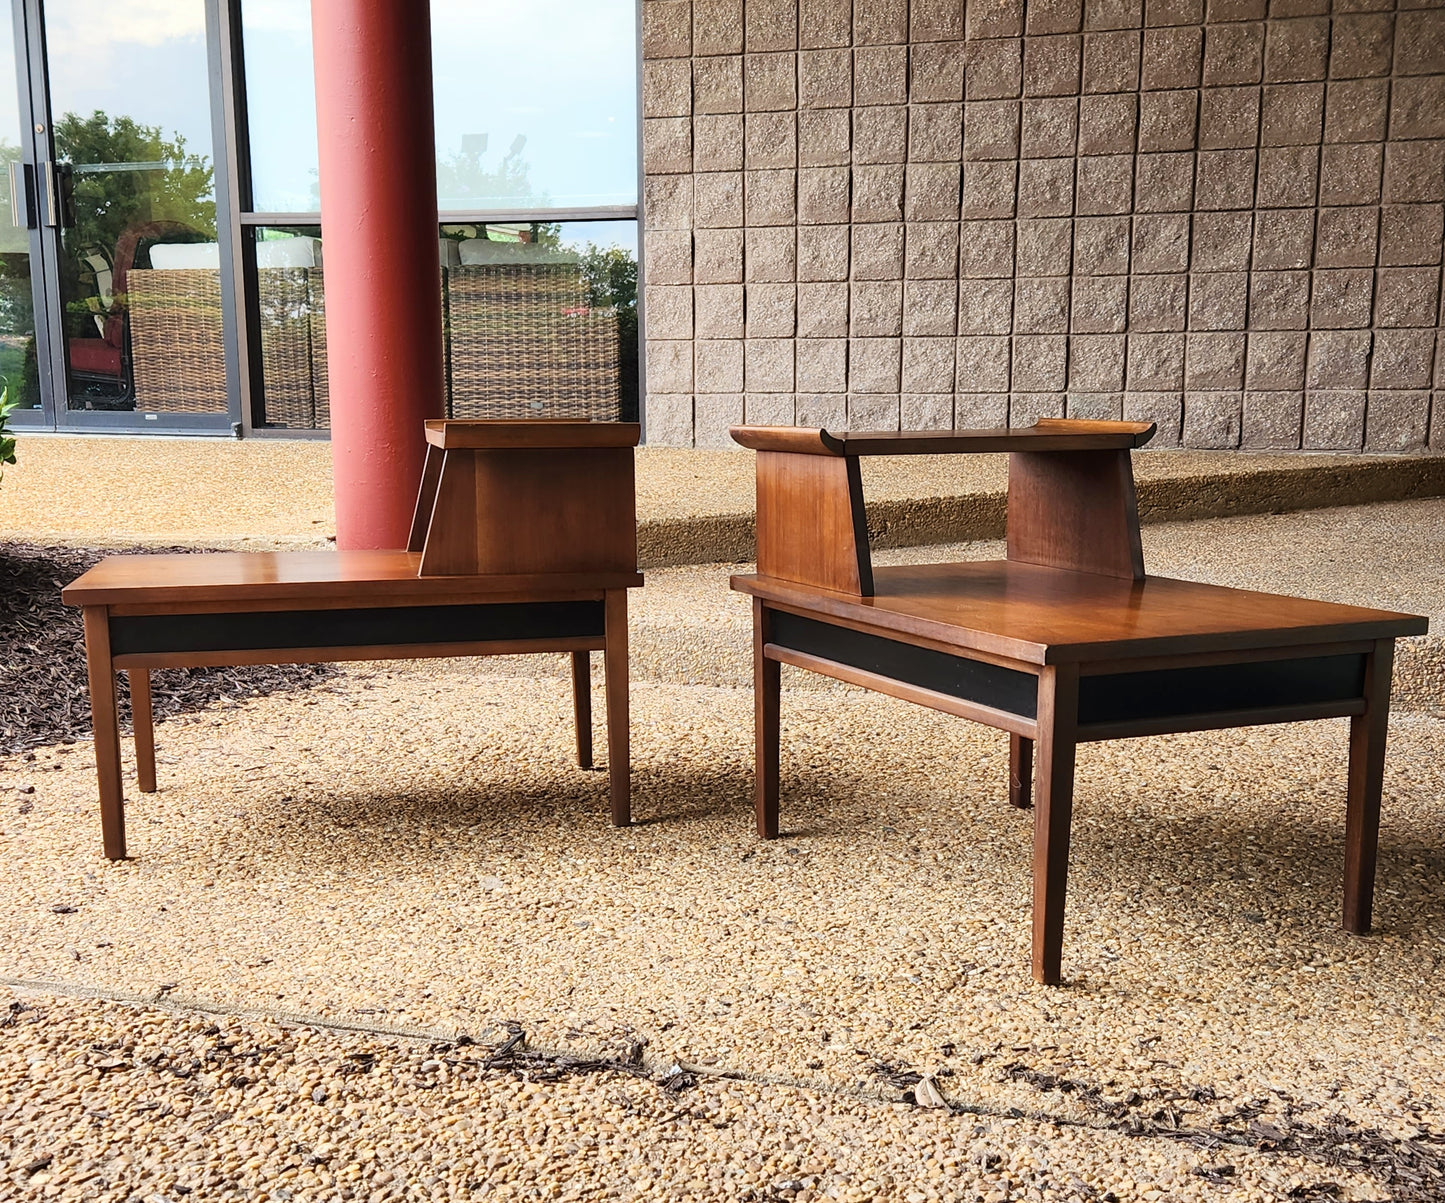 Pair of Mid-Century Modern Two Tier Walnut Step End Tables